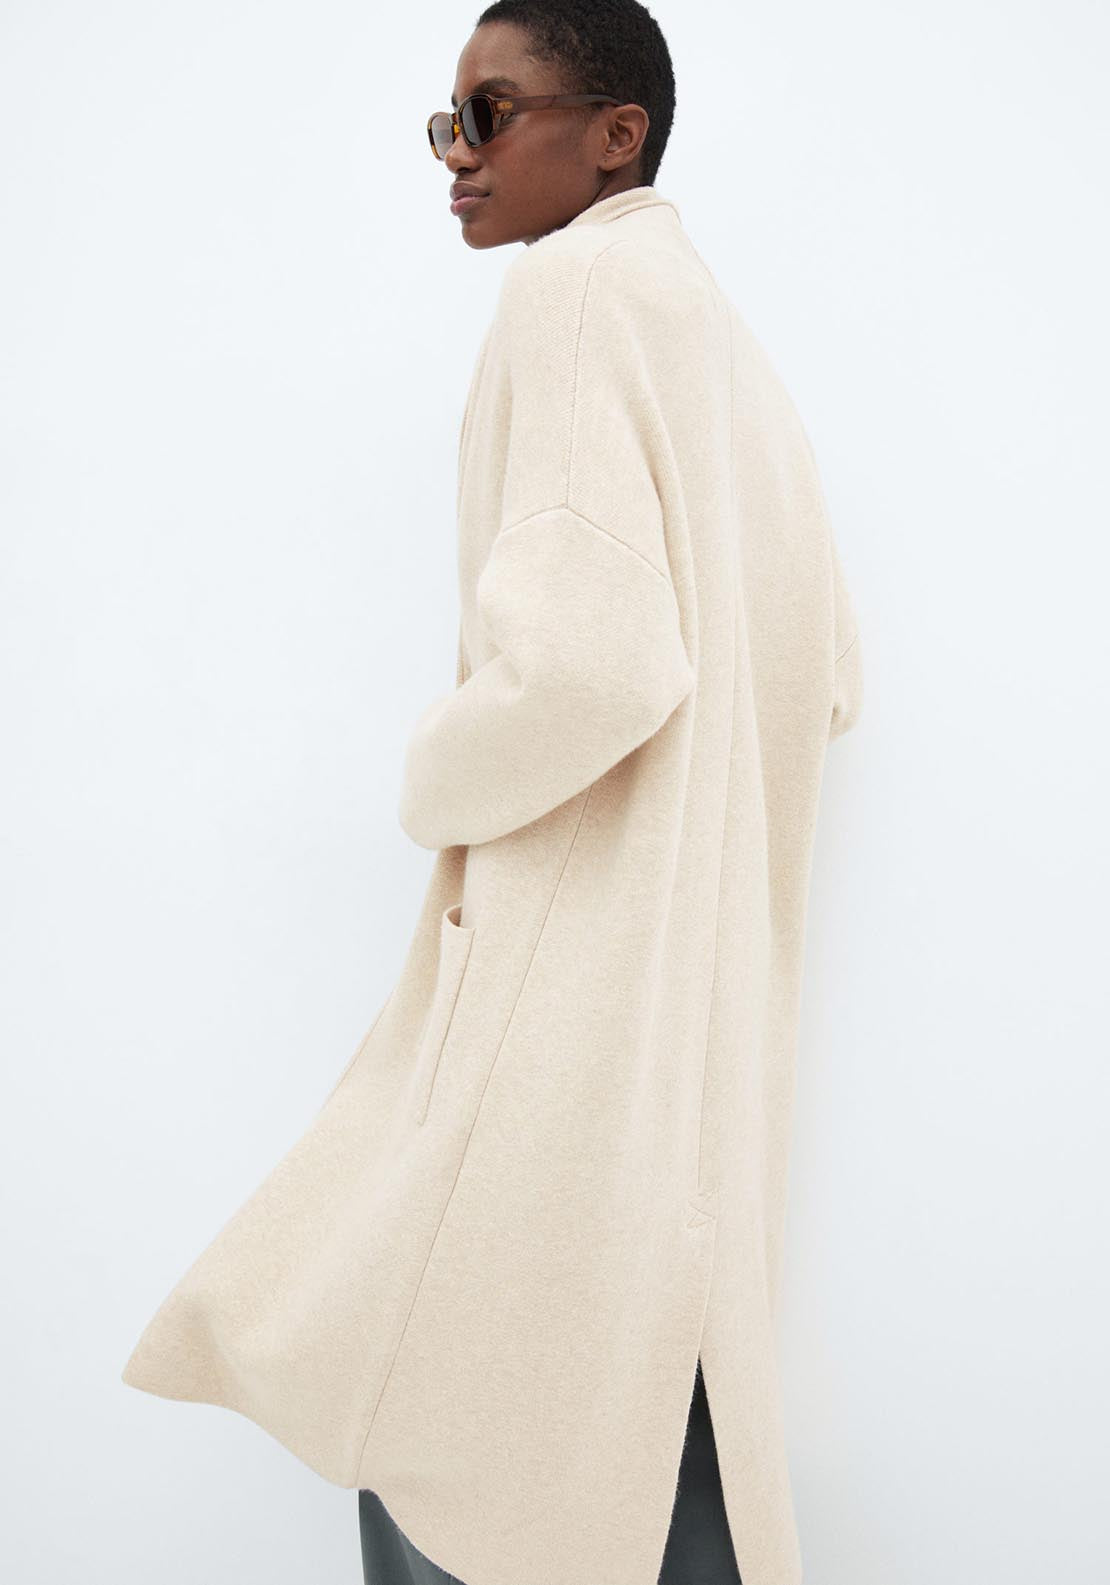 Mango Oversized knitted coat with pockets - Light 2 Shaws Department Stores